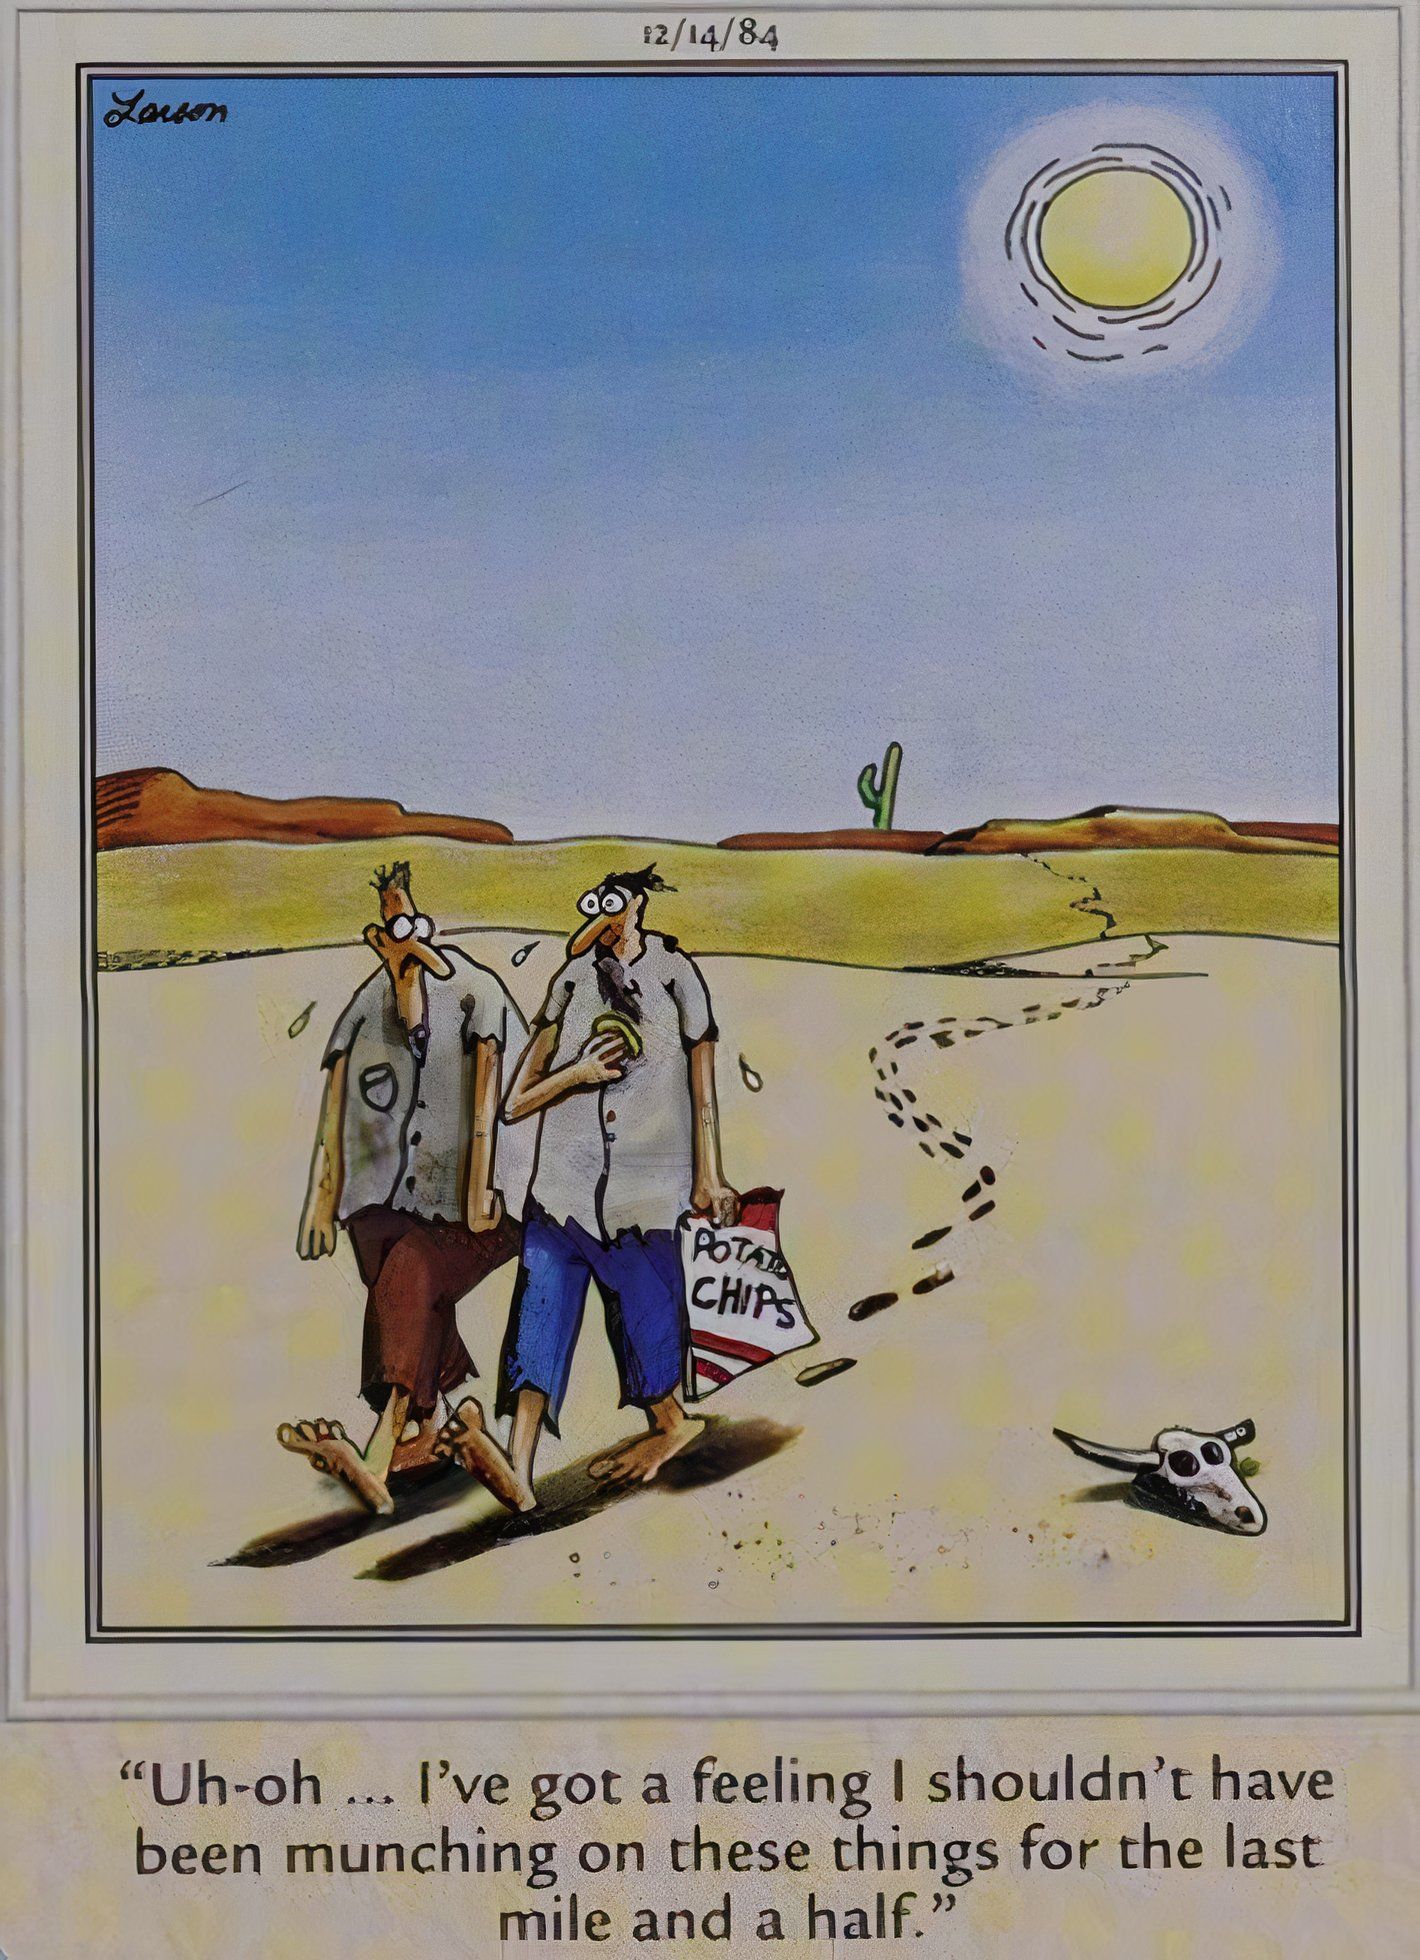 Far Side, man lost in desert realizes he shouldn't have been eating potato chips